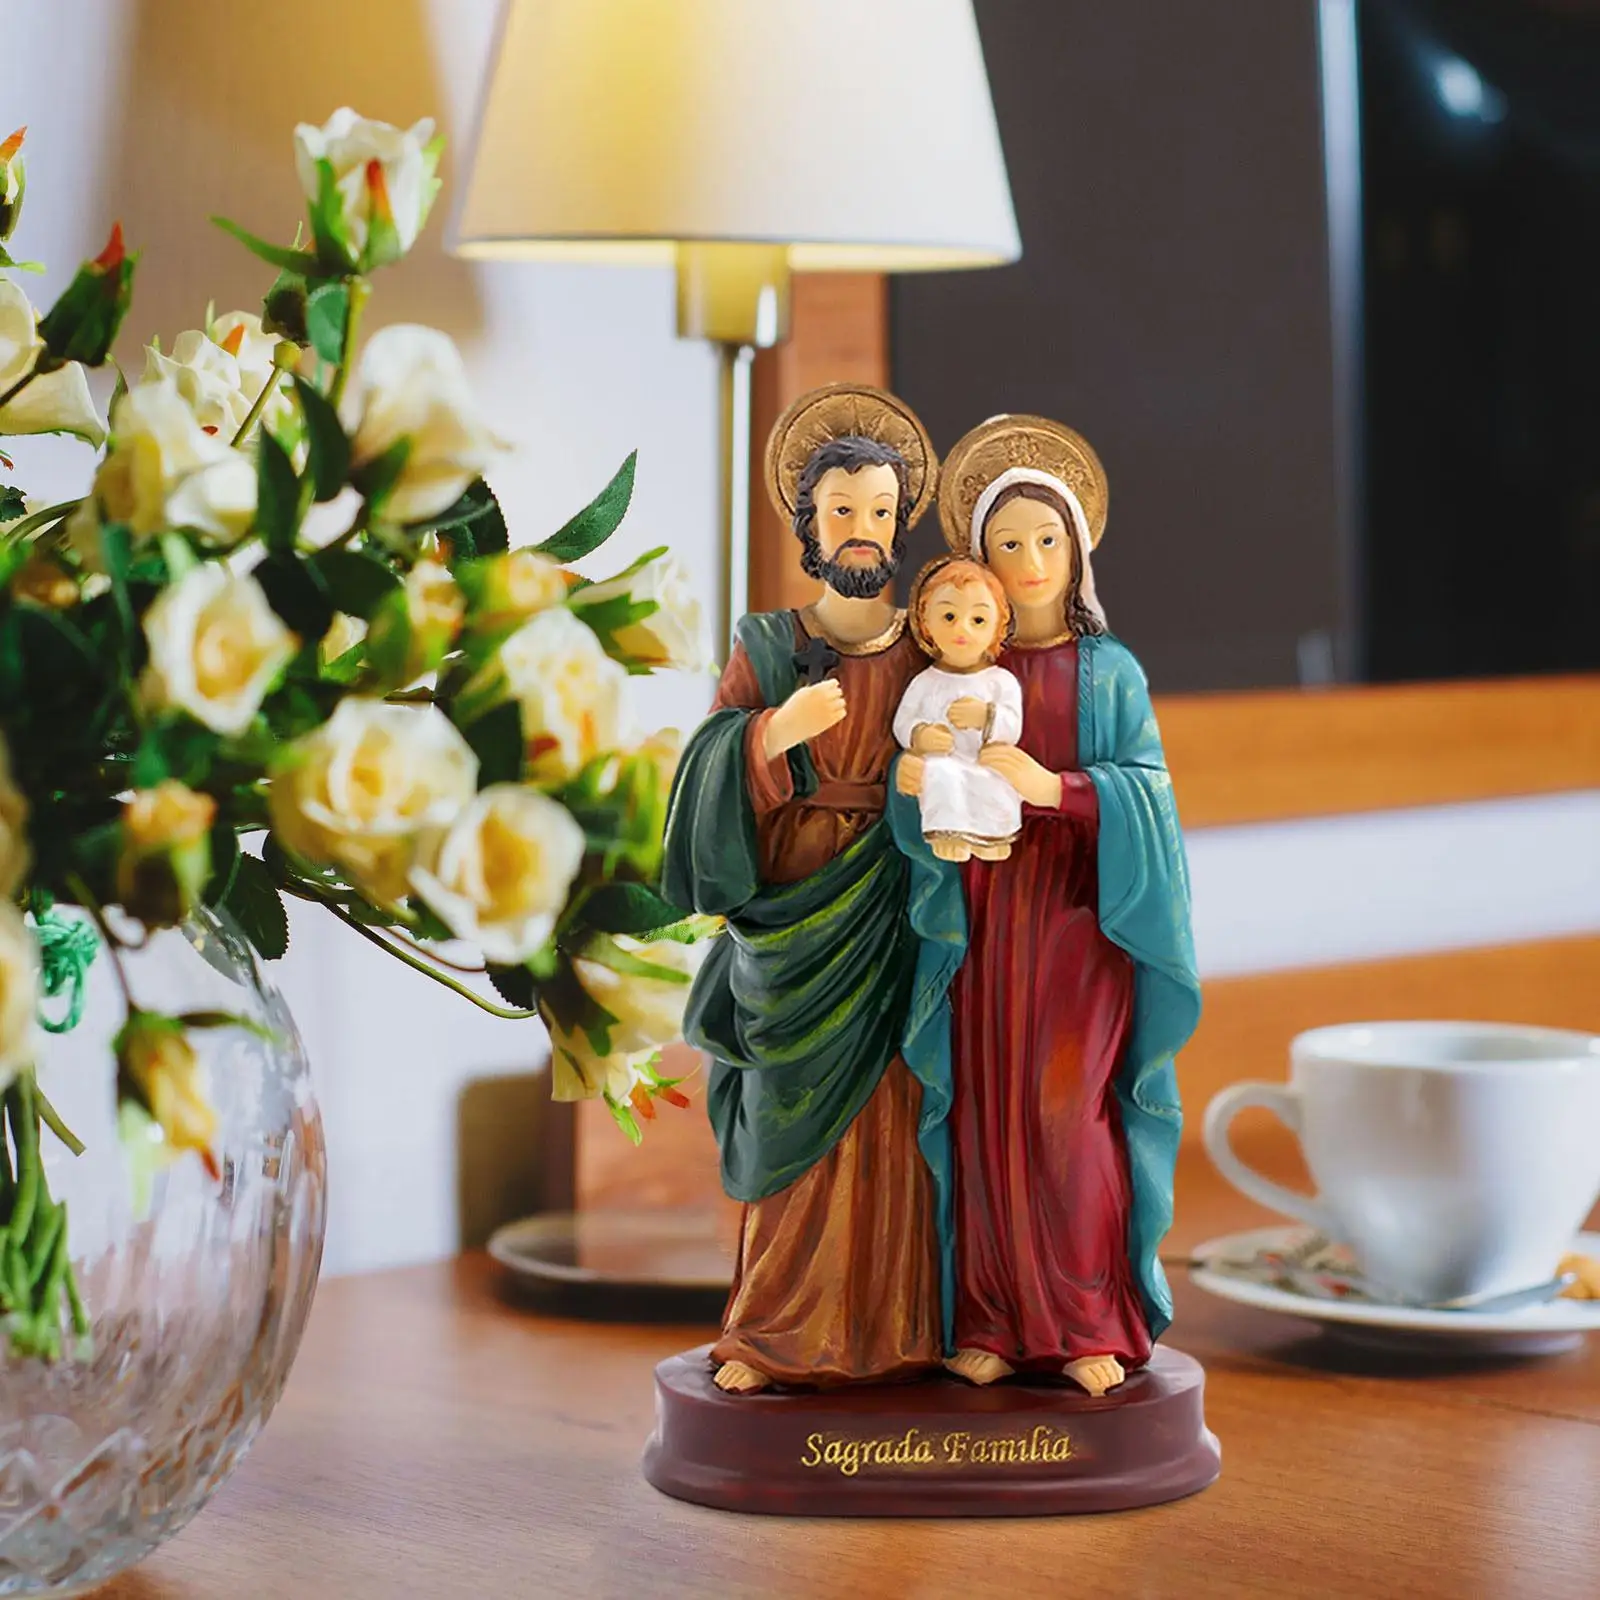 Holy Family Statue Jesus Figurine Collectible Religious Sculpture Mary Joseph Figures for Shelf Christmas Living Room Decor Gift